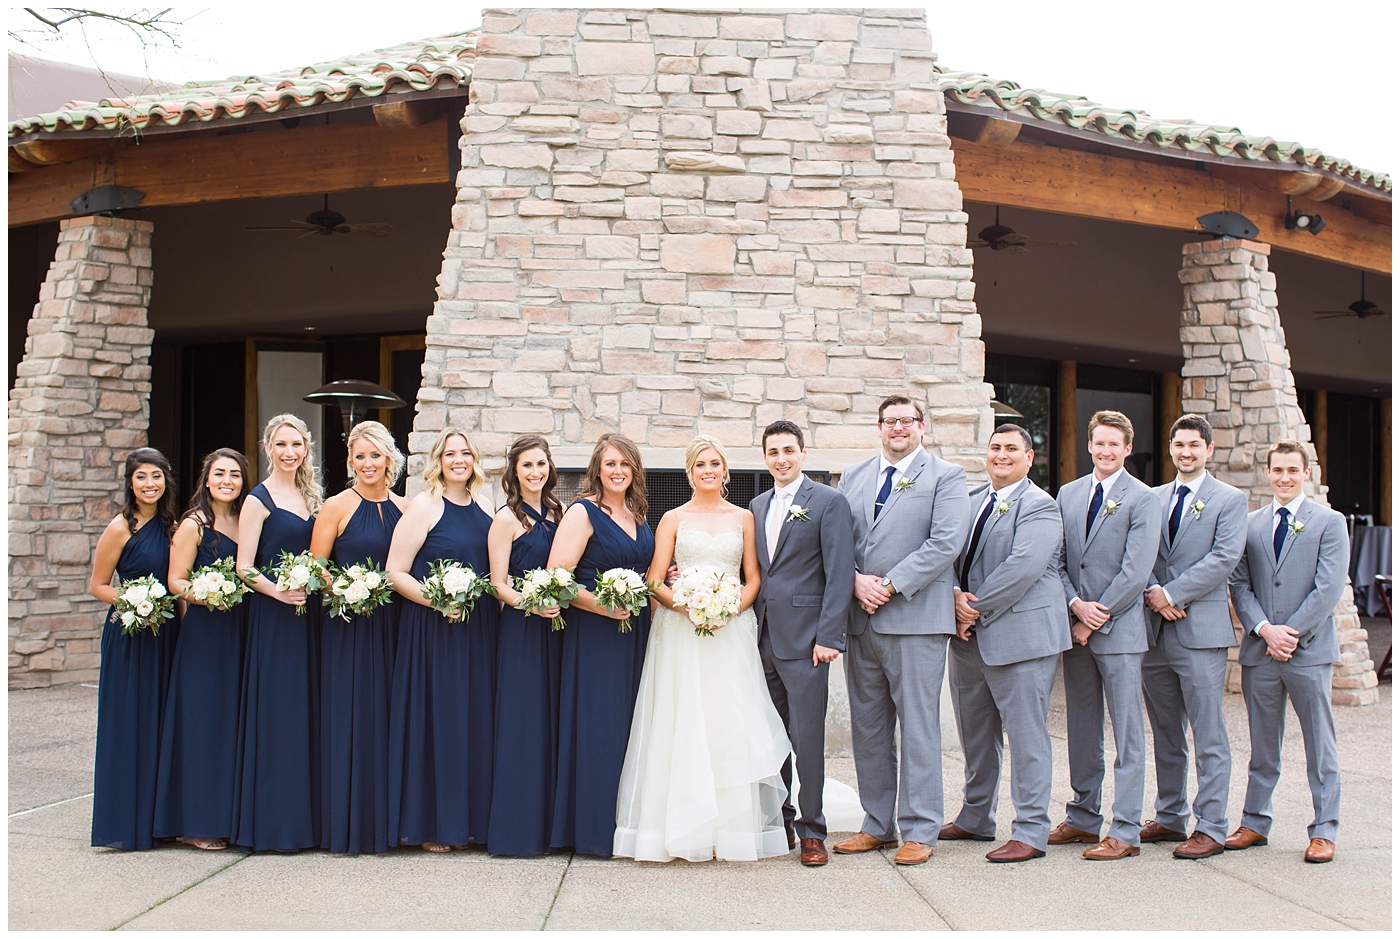 bridesmaids in assorted navy blue dresses with white rose and greenery flower bouquets with groom in gray suit with pink tie with groomsmen with navy ties on wedding day bridal party picture